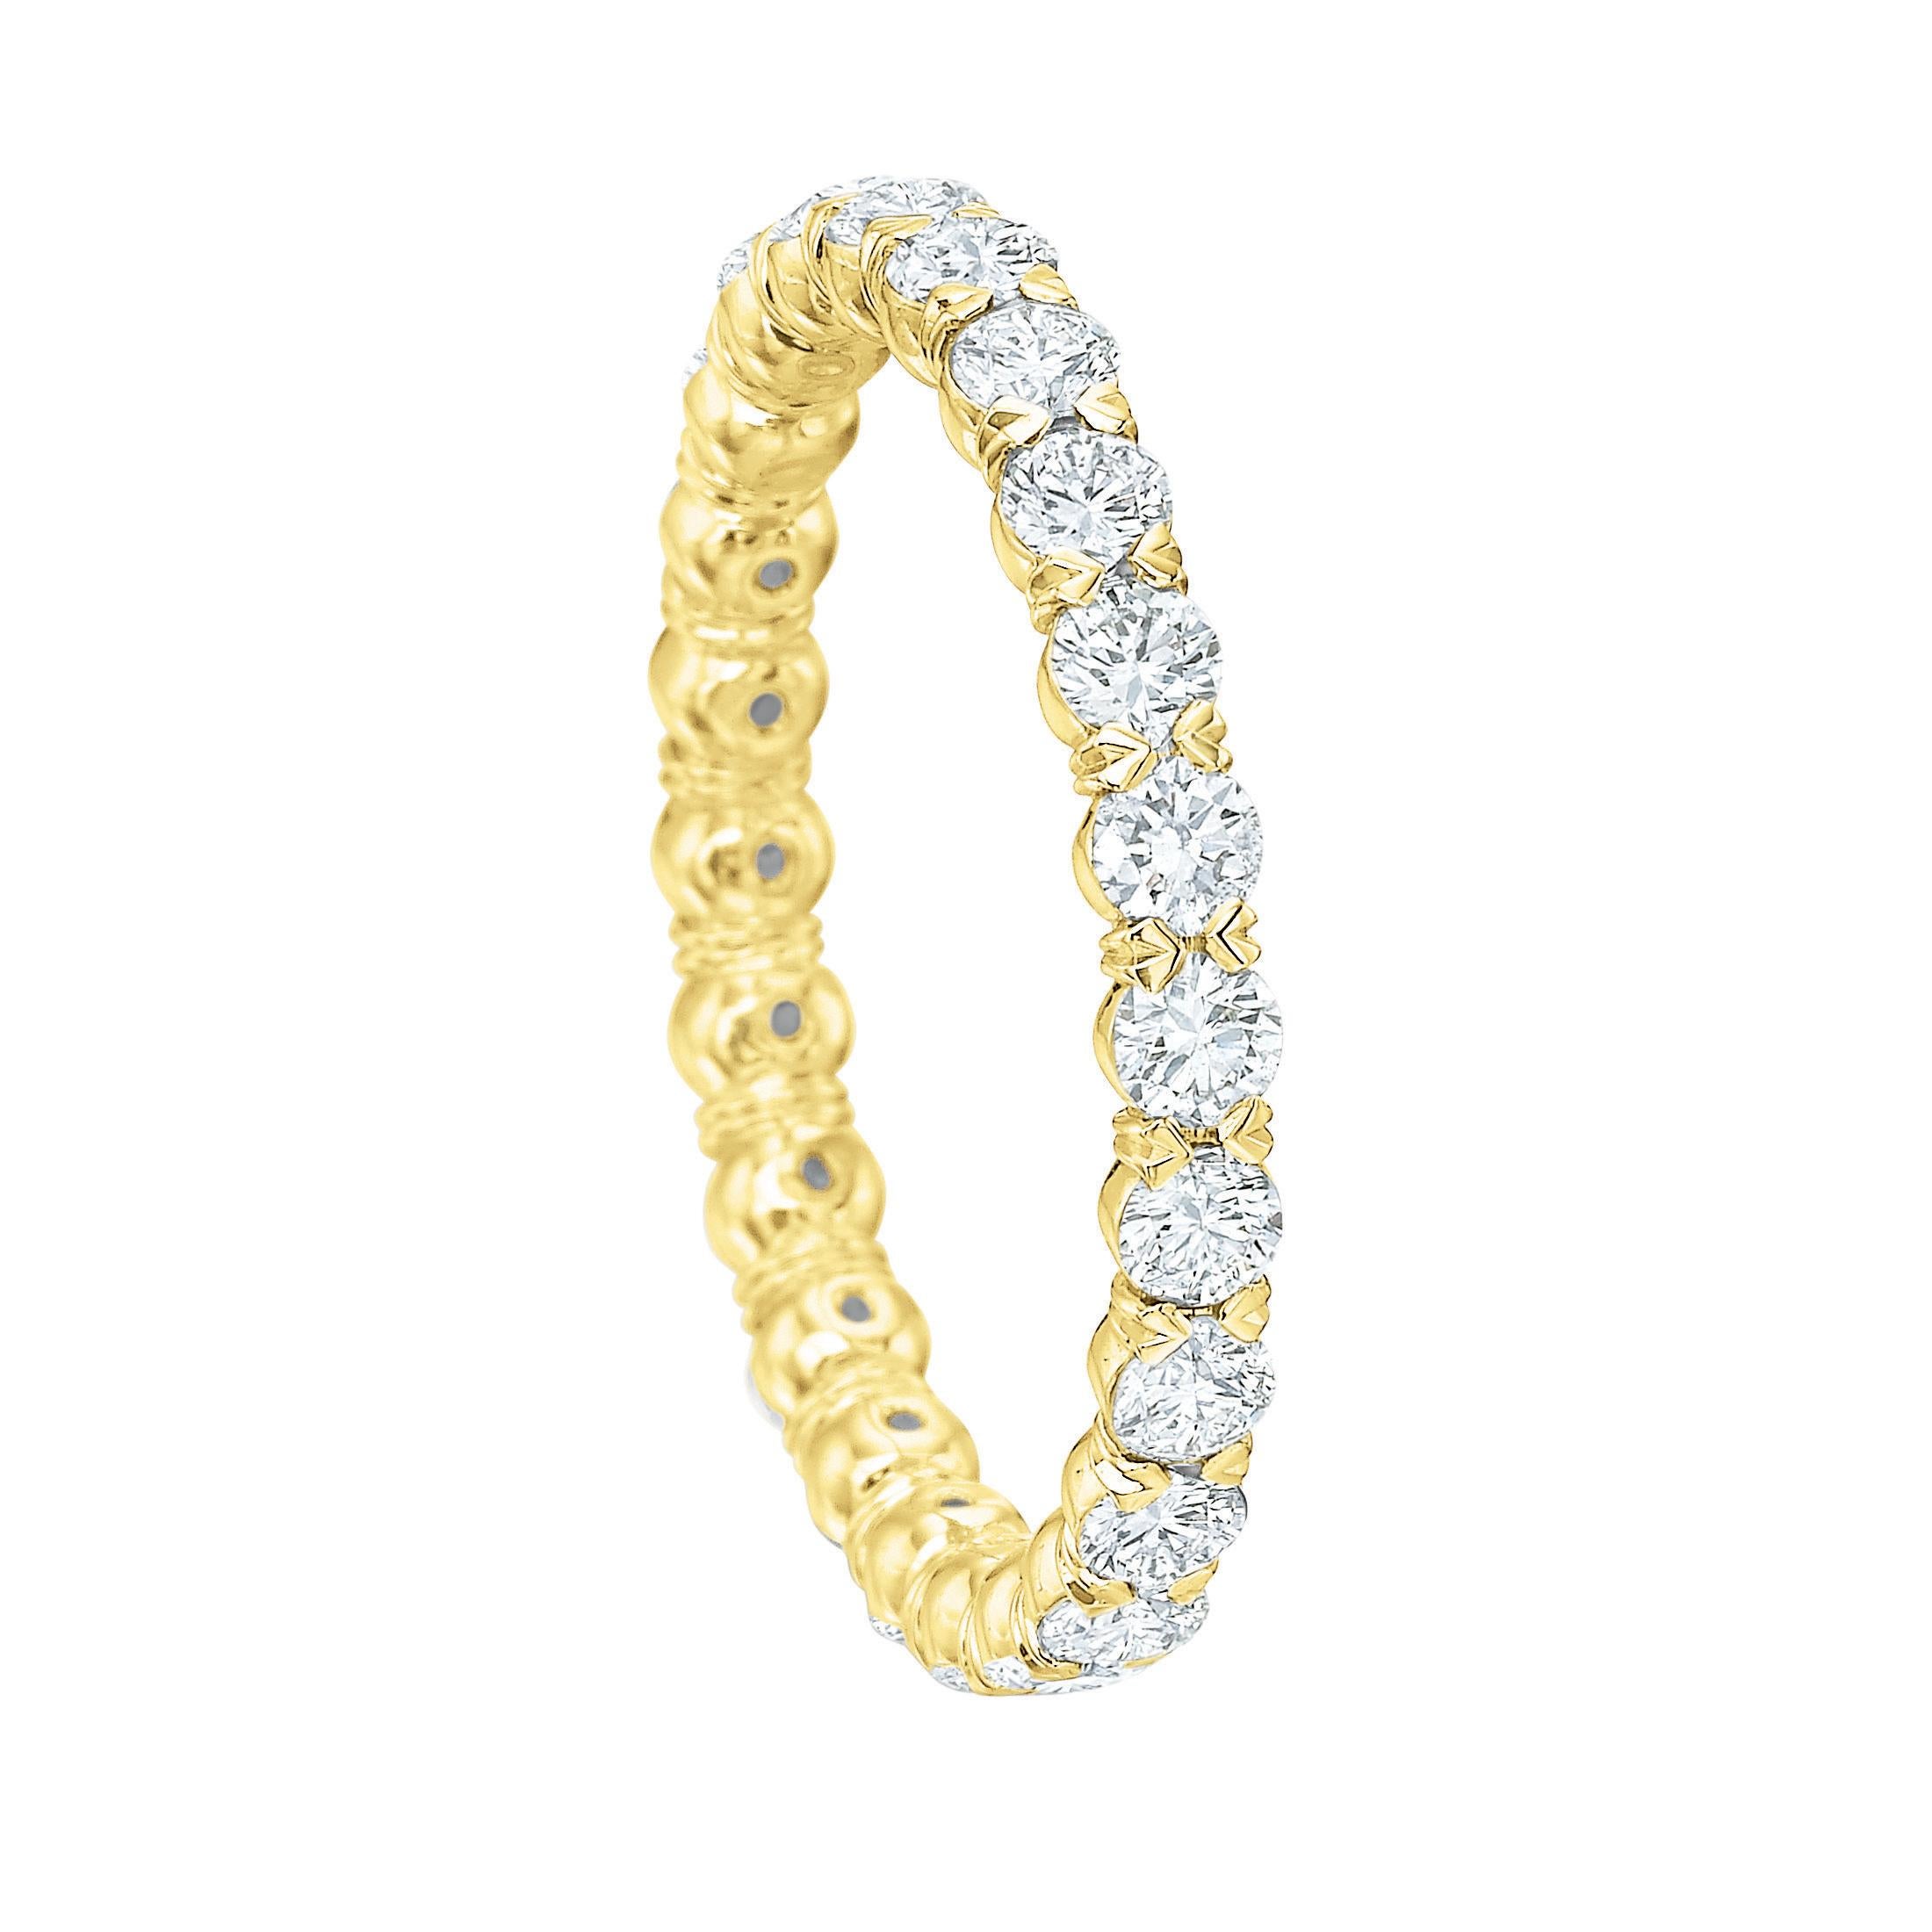 Diamond eternity band ring, showcasing round brilliant-cut diamonds set with shared prongs in a sculpted 18k yellow gold mounting.

Twenty-four diamonds weighing 1.18 total carats
2.5mm wide
Size 6